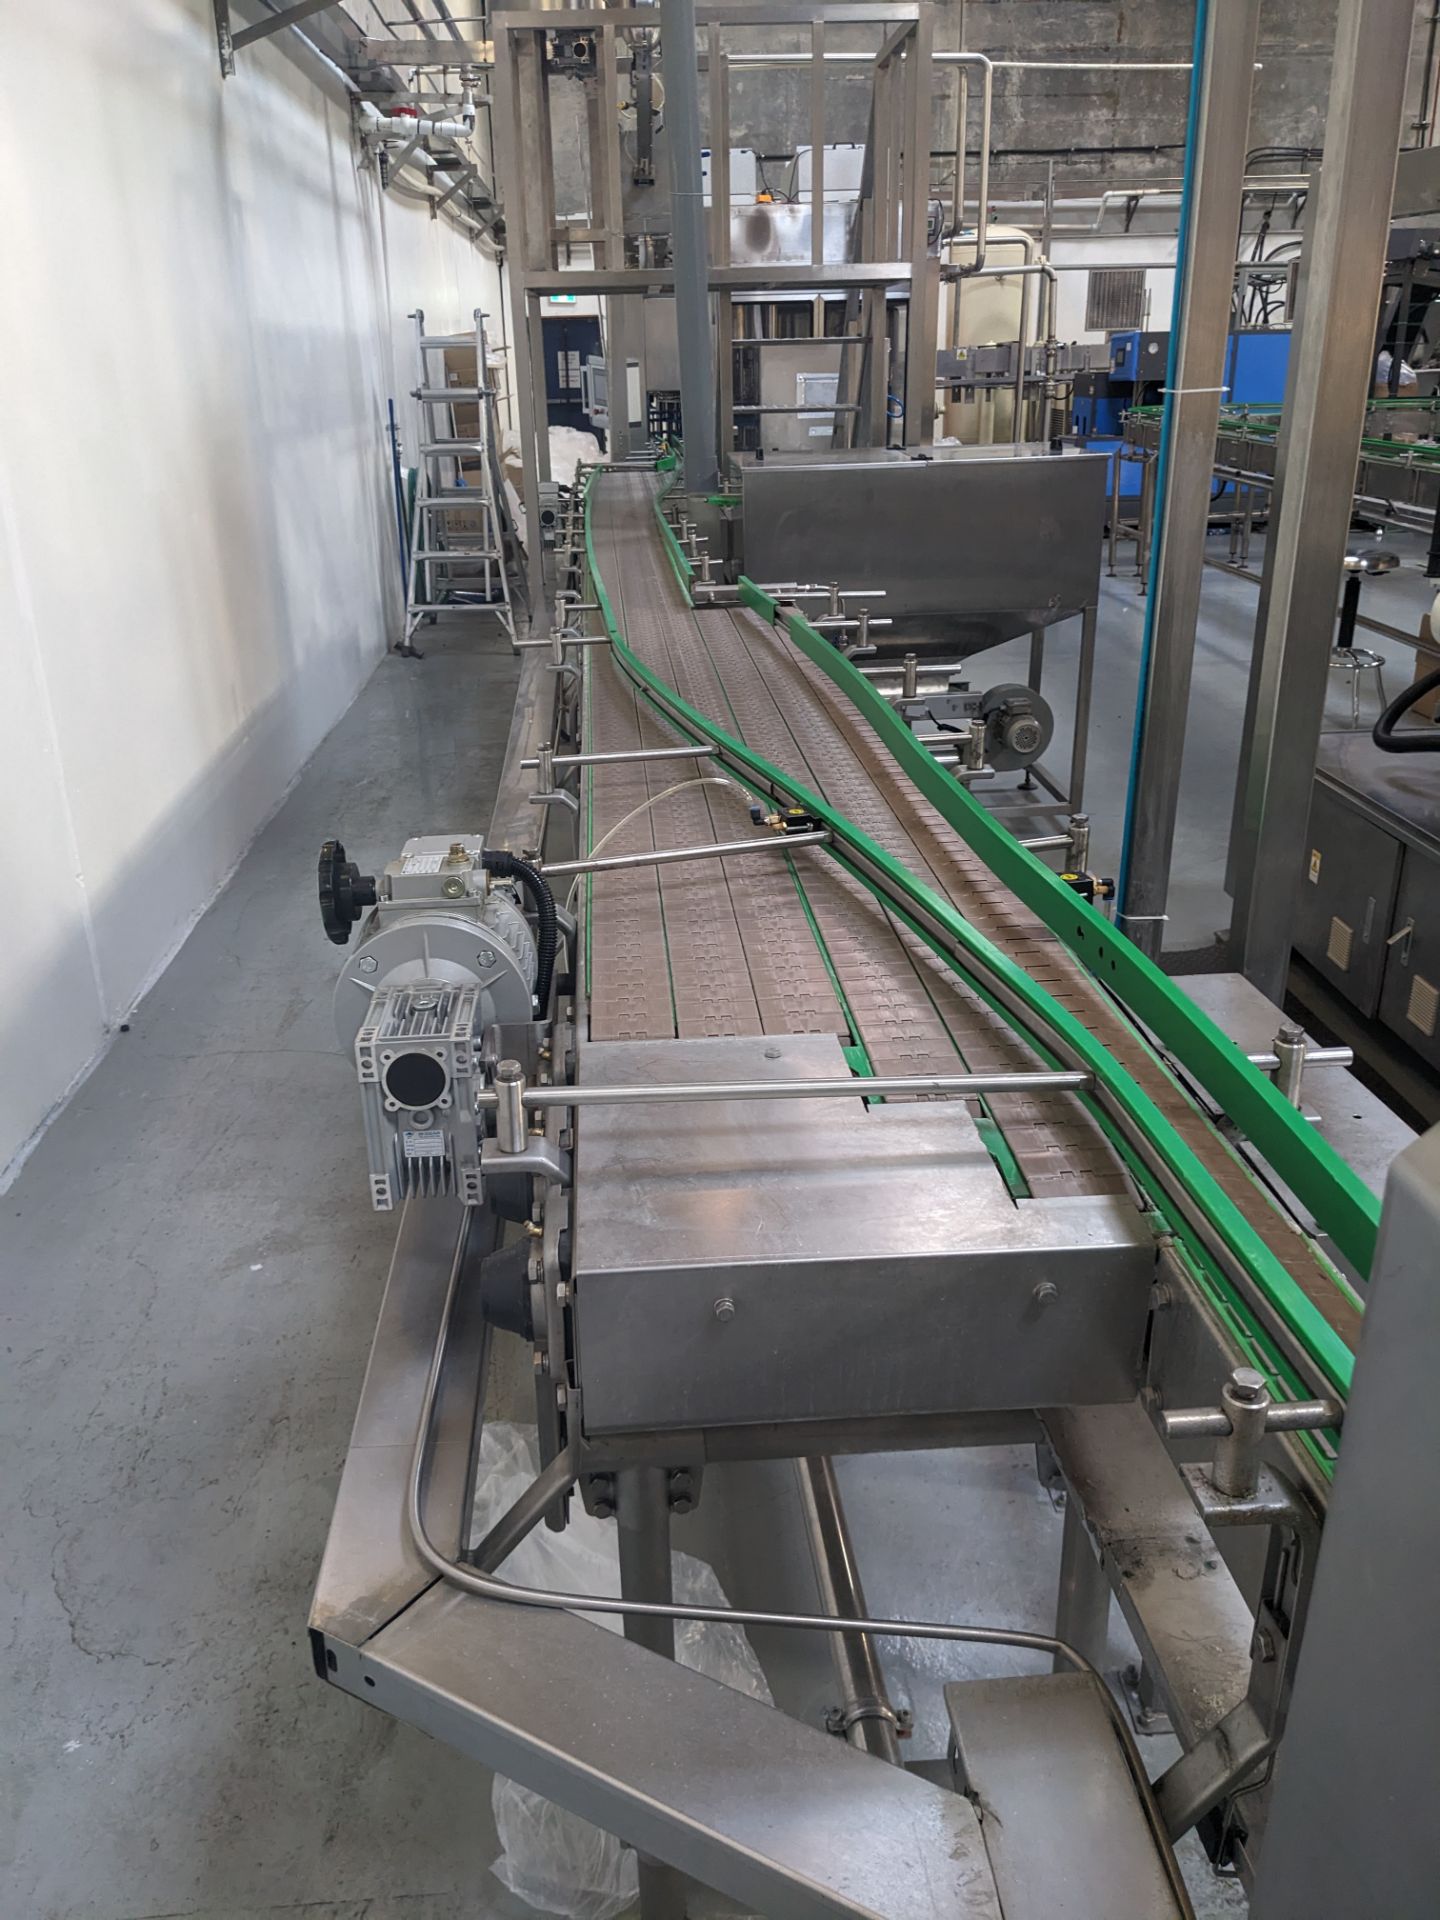 Approx. 24 ft D-Real Motorized Bottle Conveyor with 2 Vari Drive Adjustable Speed Control Motors